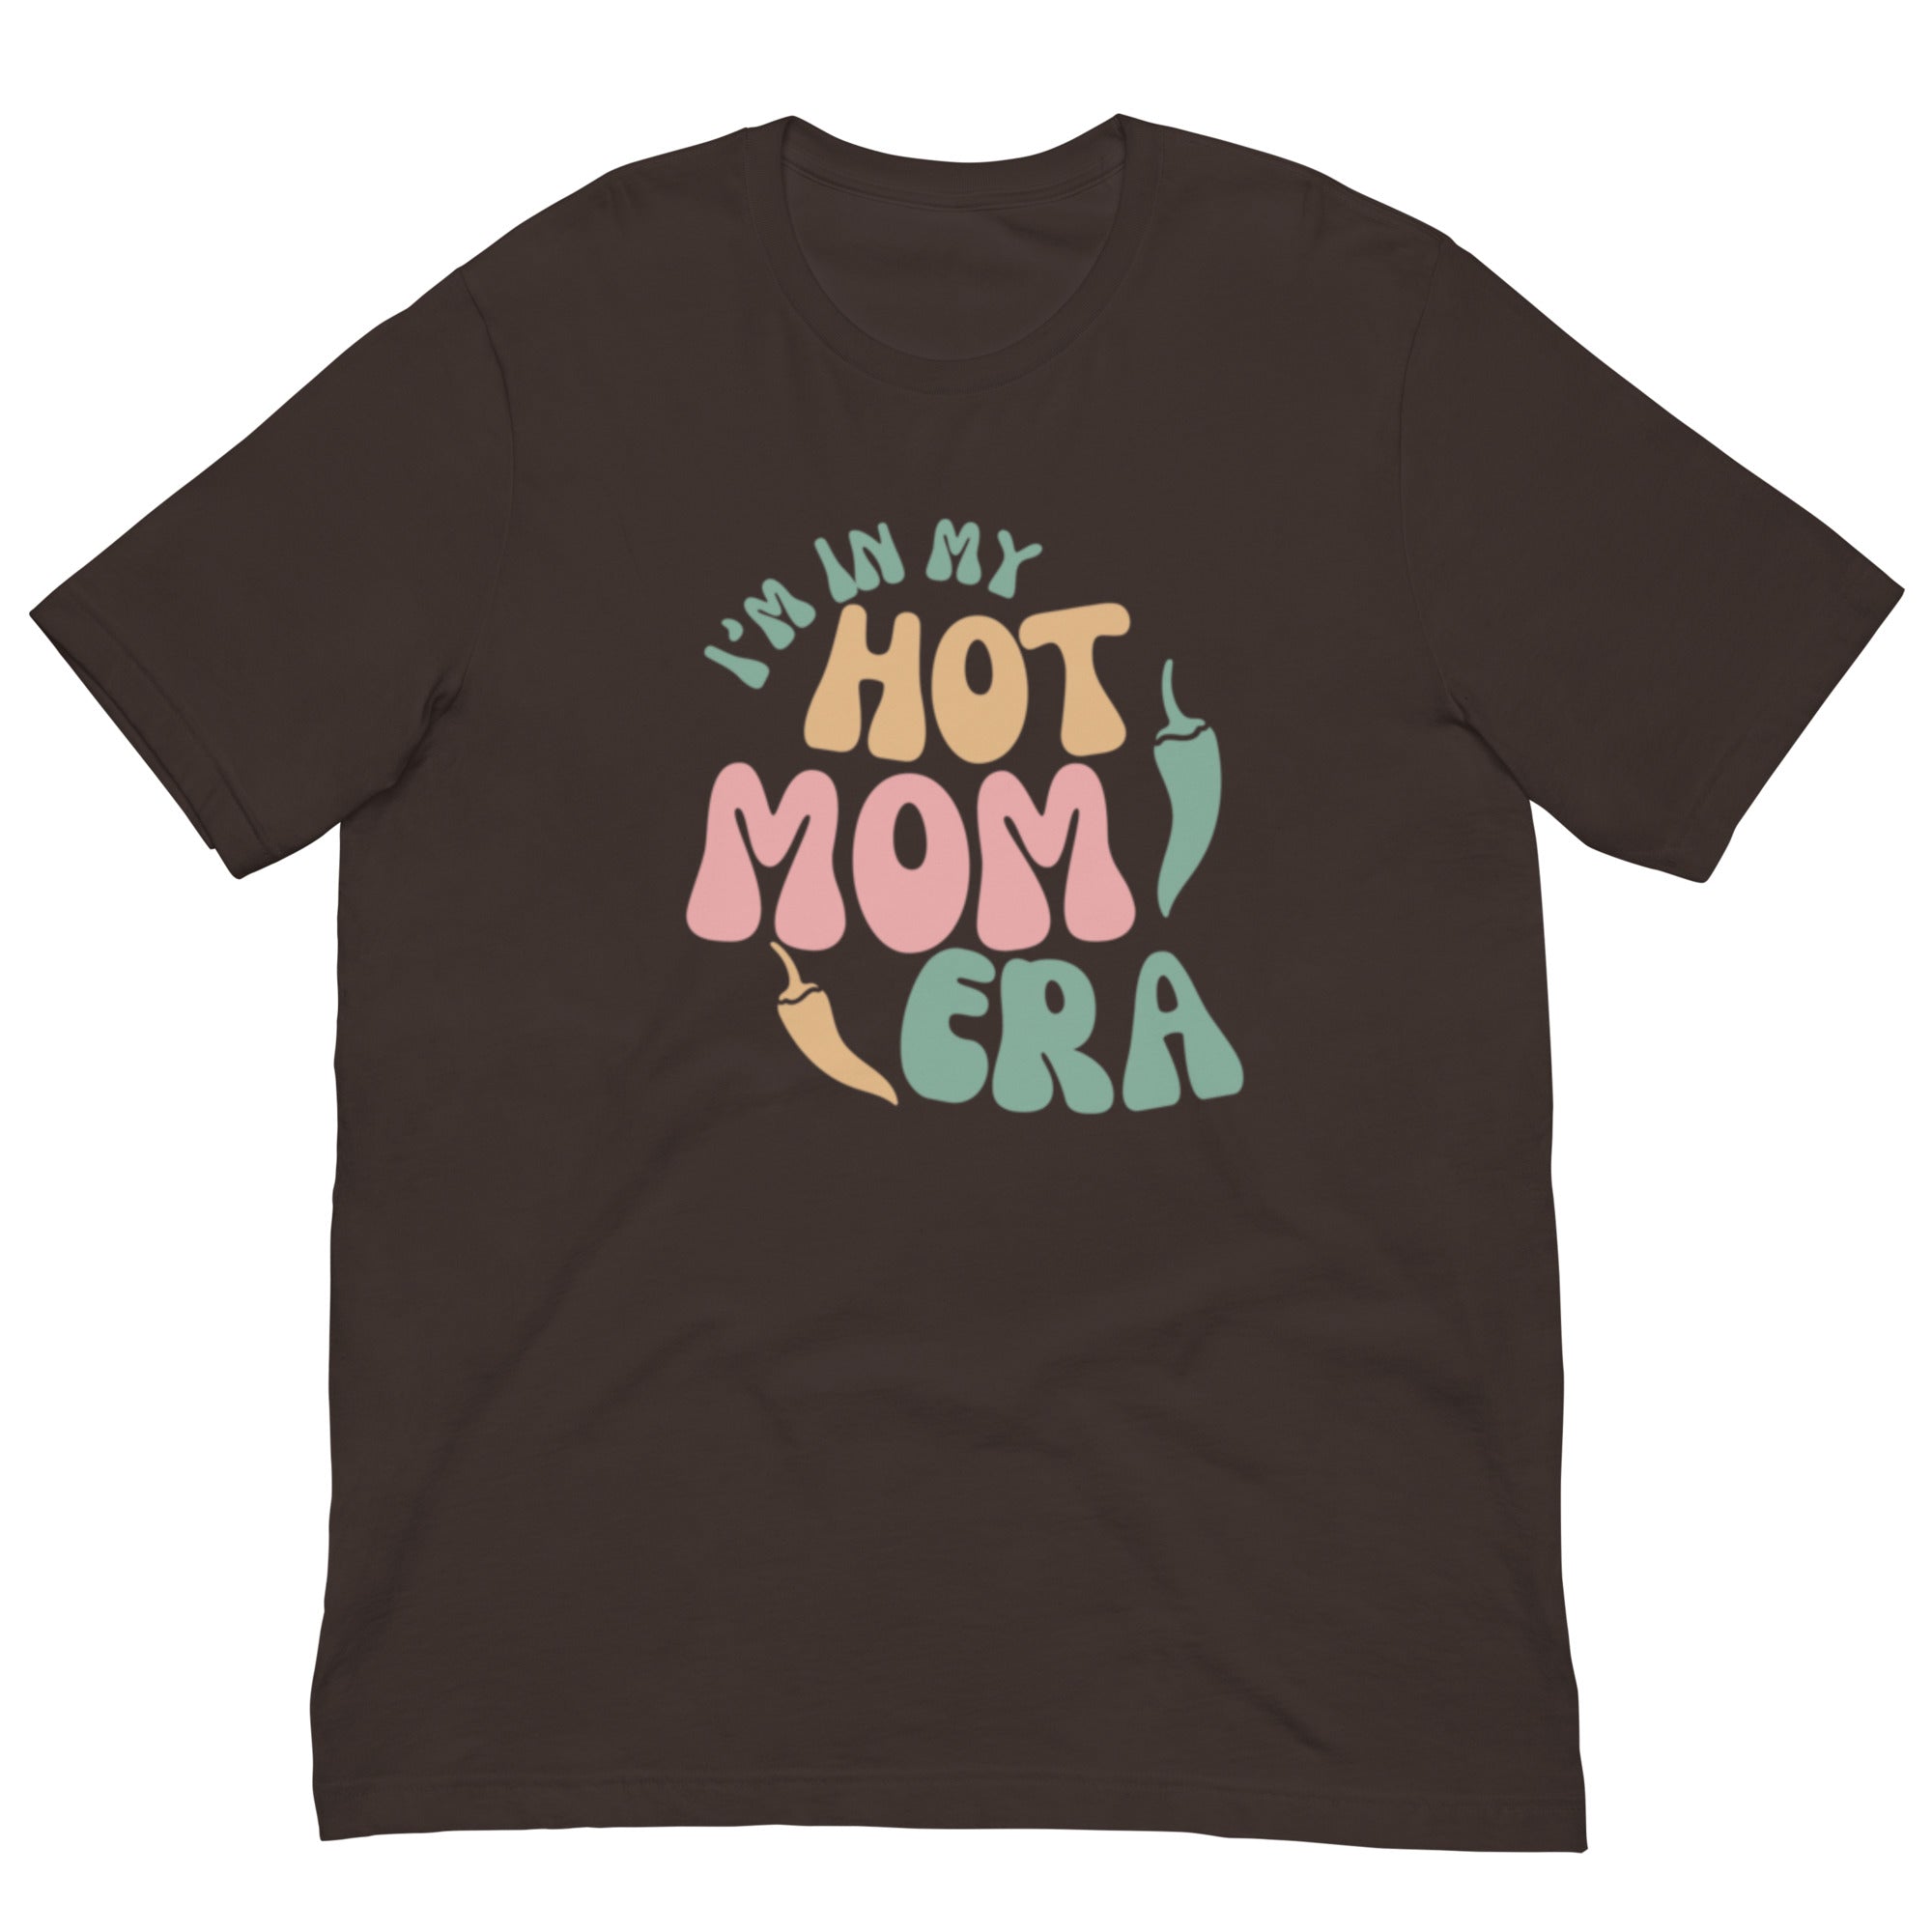 A brown, breathable Era Shirt with the phrase "in my hot mom era" printed in colorful, playful letters on the front.